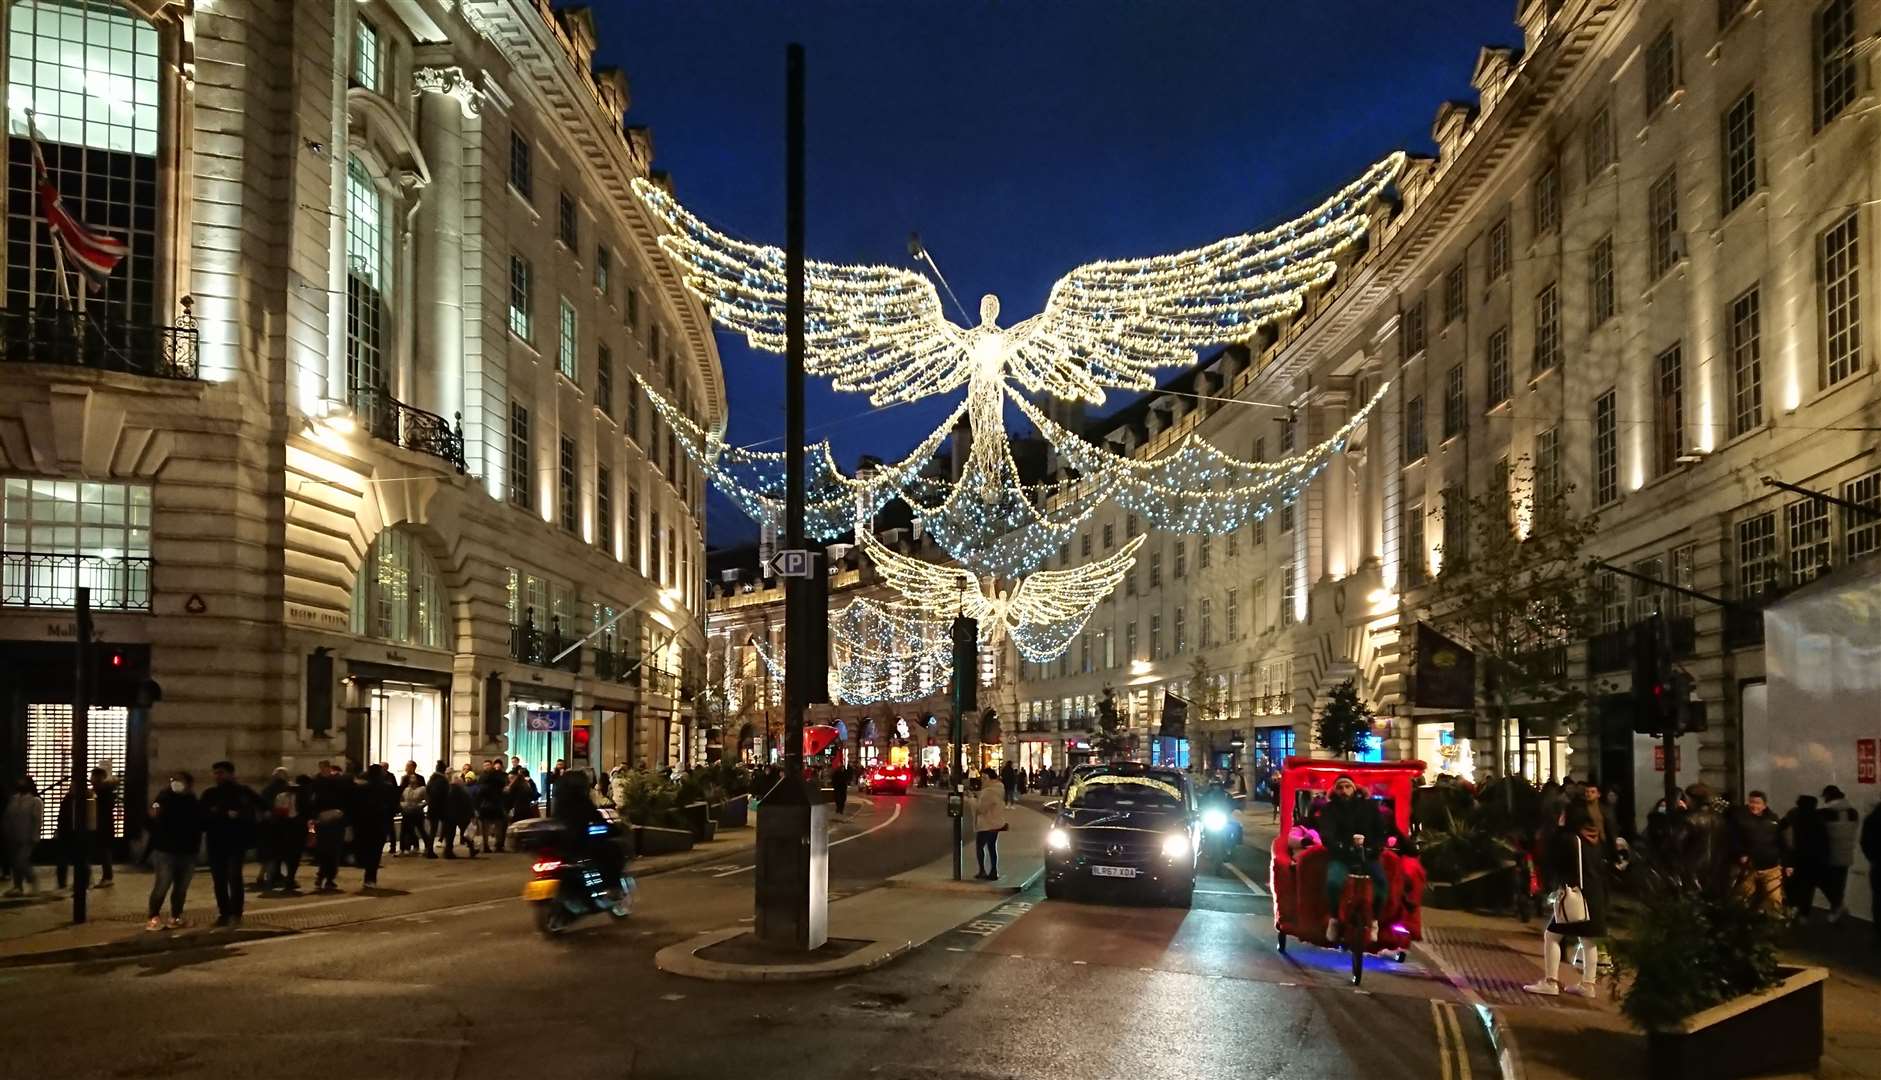 Seeing the incredible Christmas lights in Regent Street was a magical experience